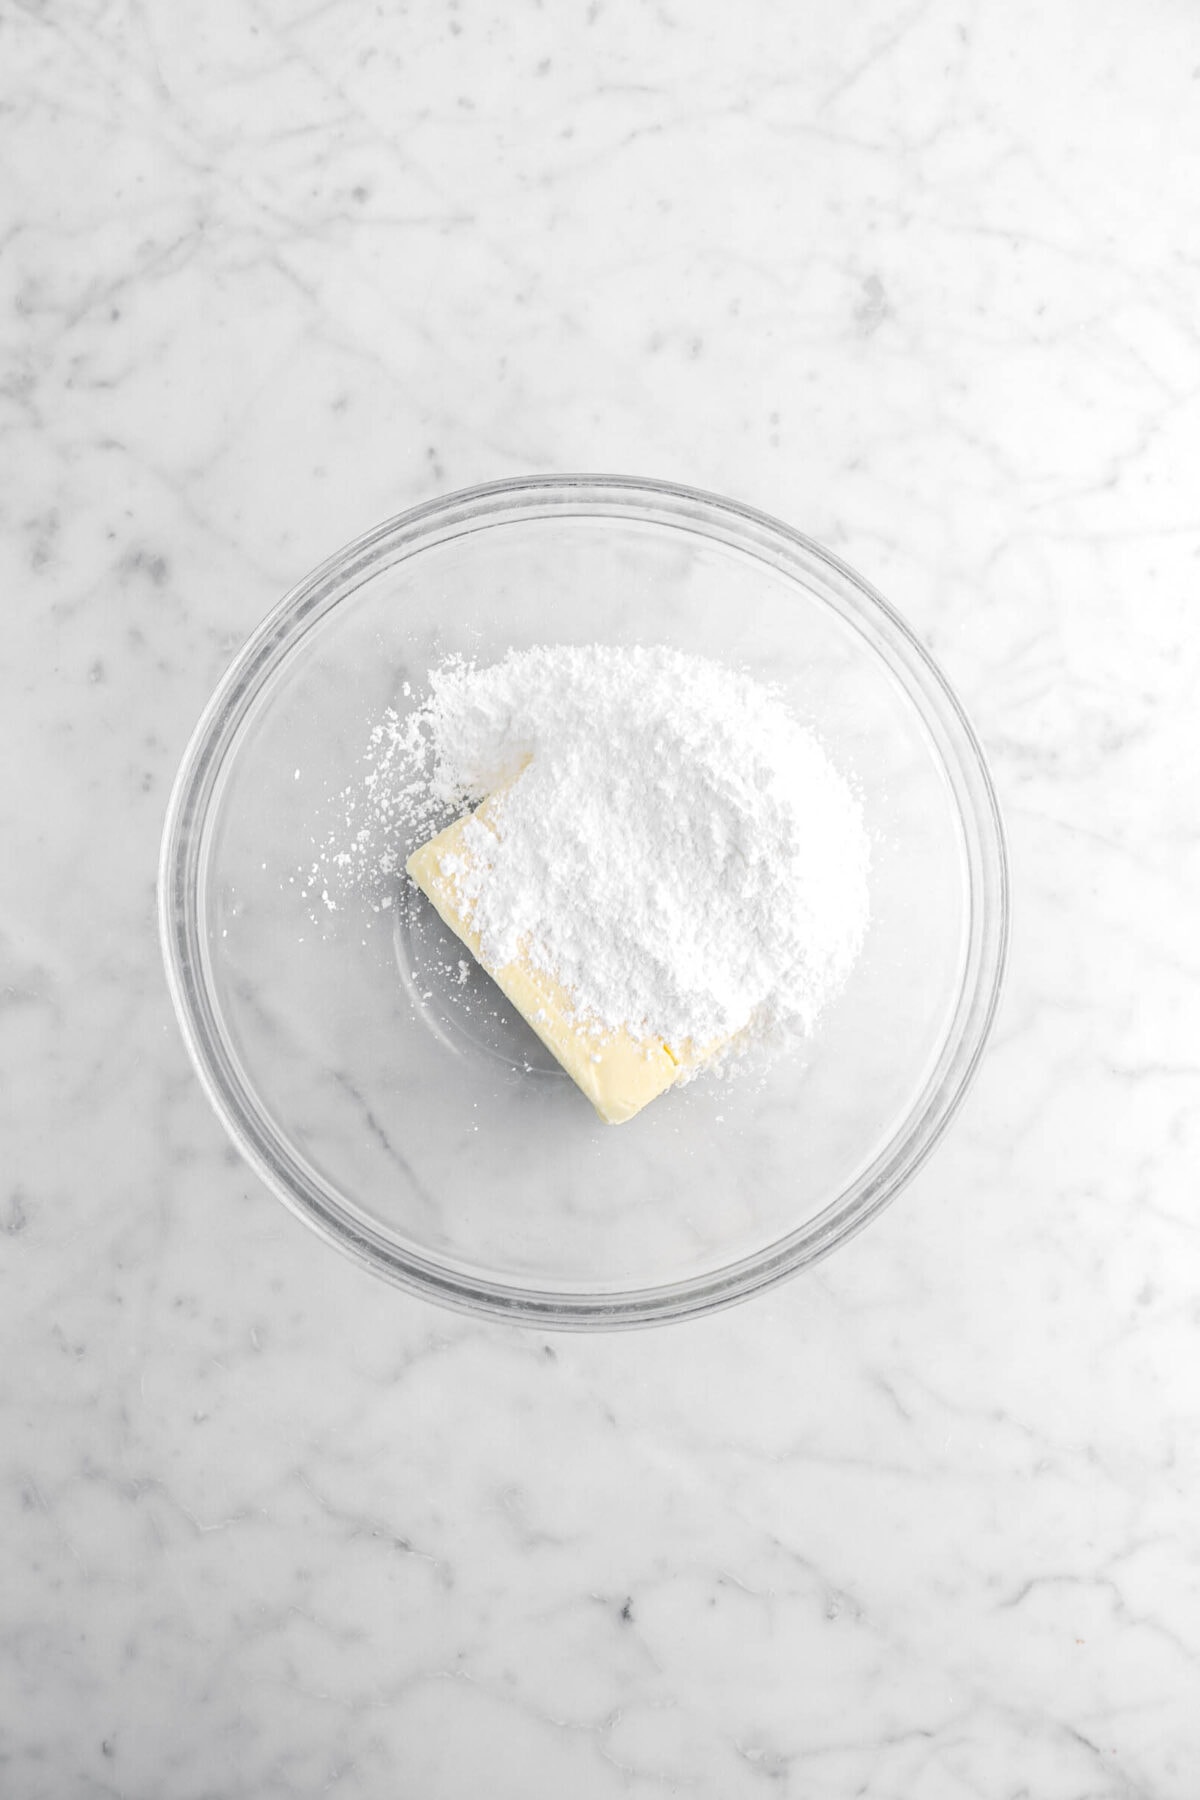 butter and powdered sugar in glass bowl.